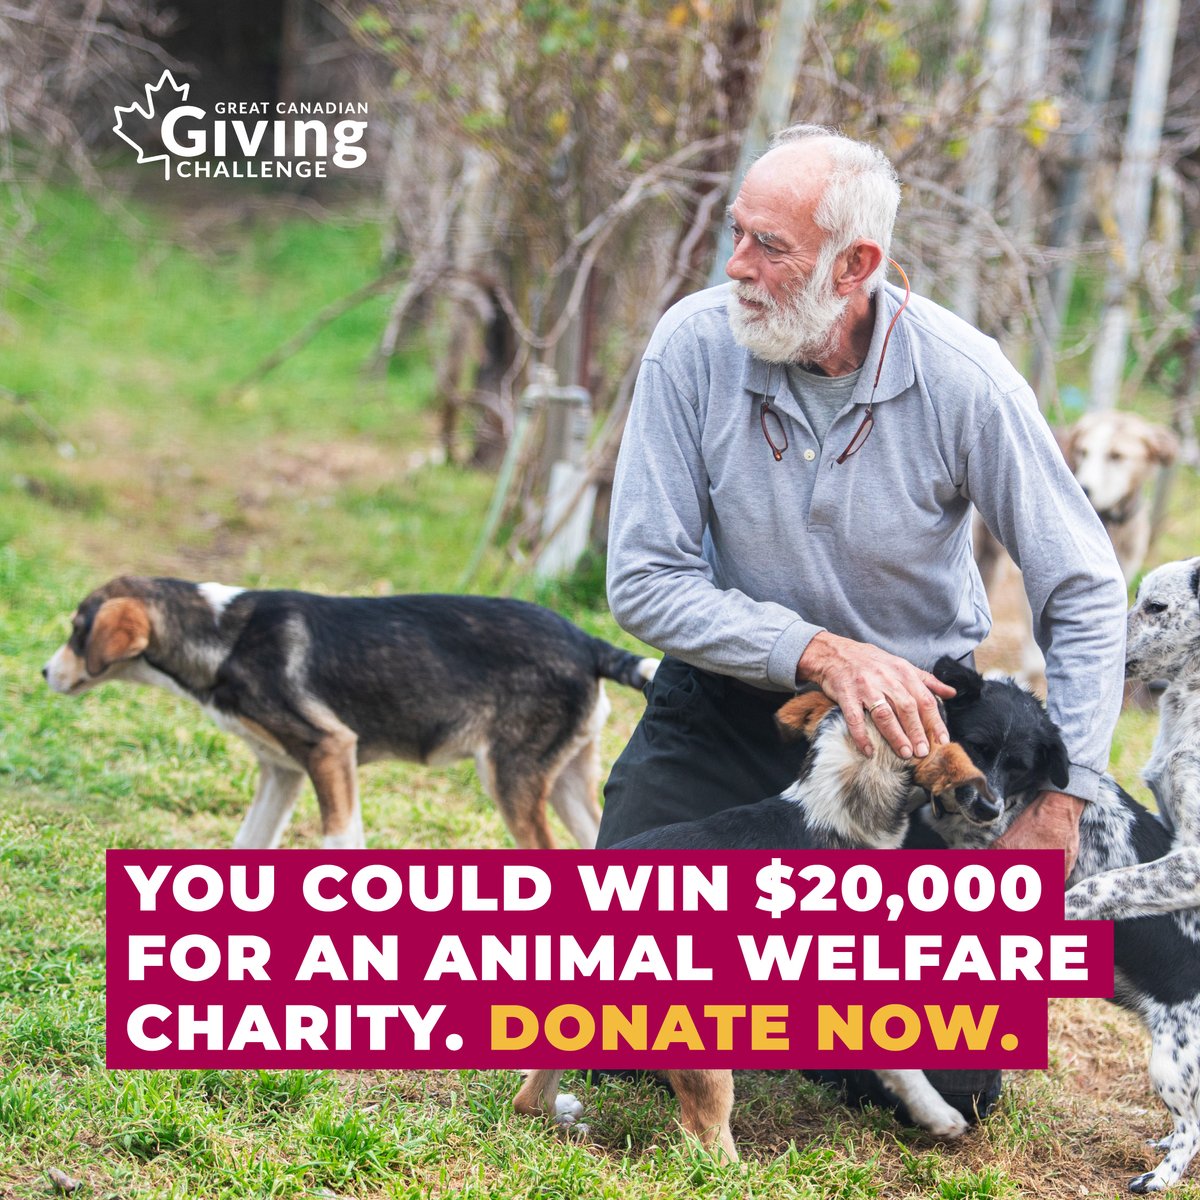 Imagine the impact that $20,000 can have on animals in need – across Canada and around the world! Browse animal welfare charities today and enter them for a chance to WIN. Visit: canadahelps.org/en/support-ani… #GivingChallengeCA

#fact #stat #charity #canadahelps